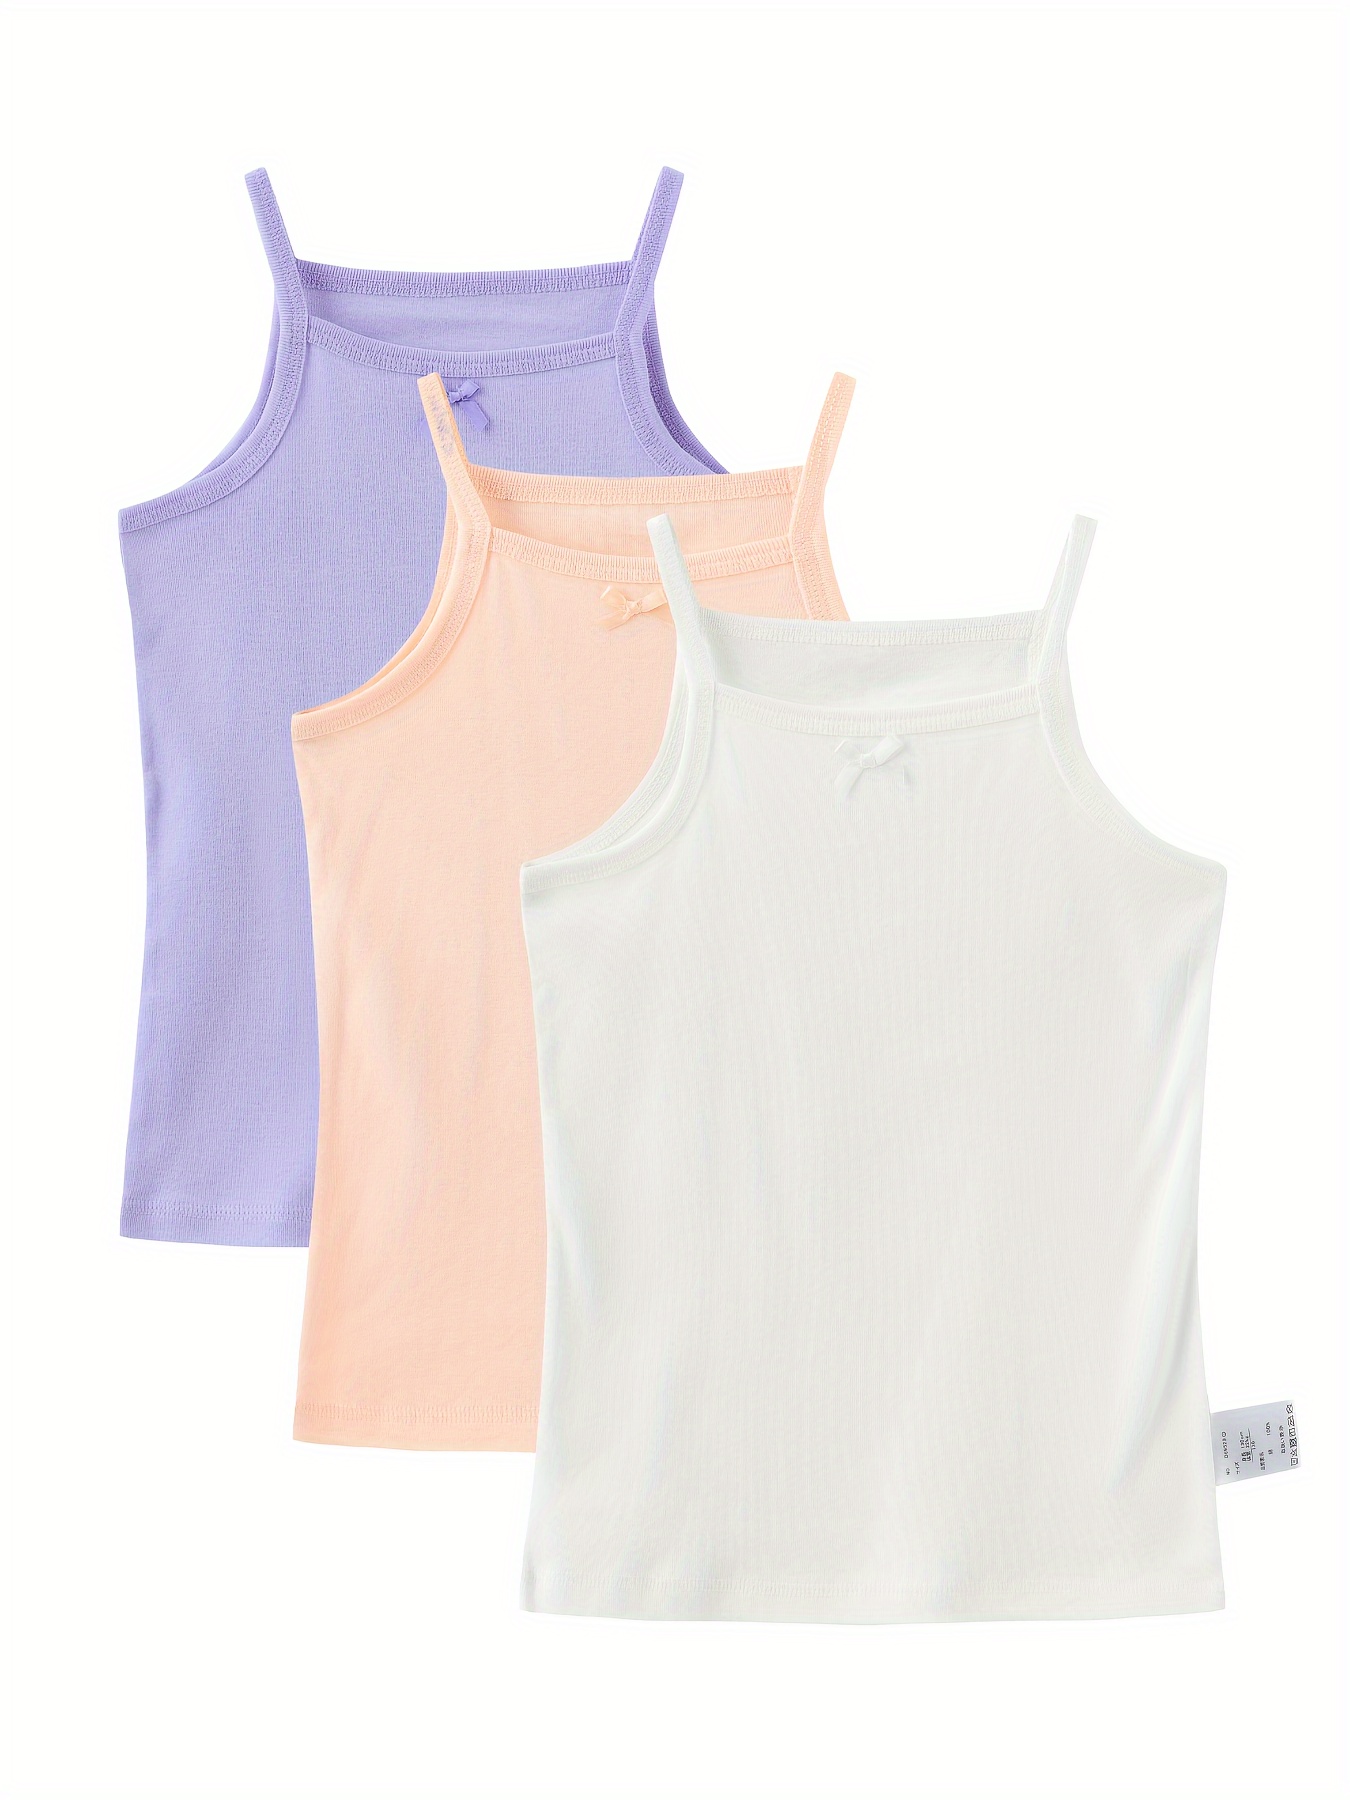 Women's Cotton Camisoles,Soft &Comfy Cami Undershirt Sleeveless Lace Neck  Tank Tops 2-Pack(XS,Purple) at  Women's Clothing store